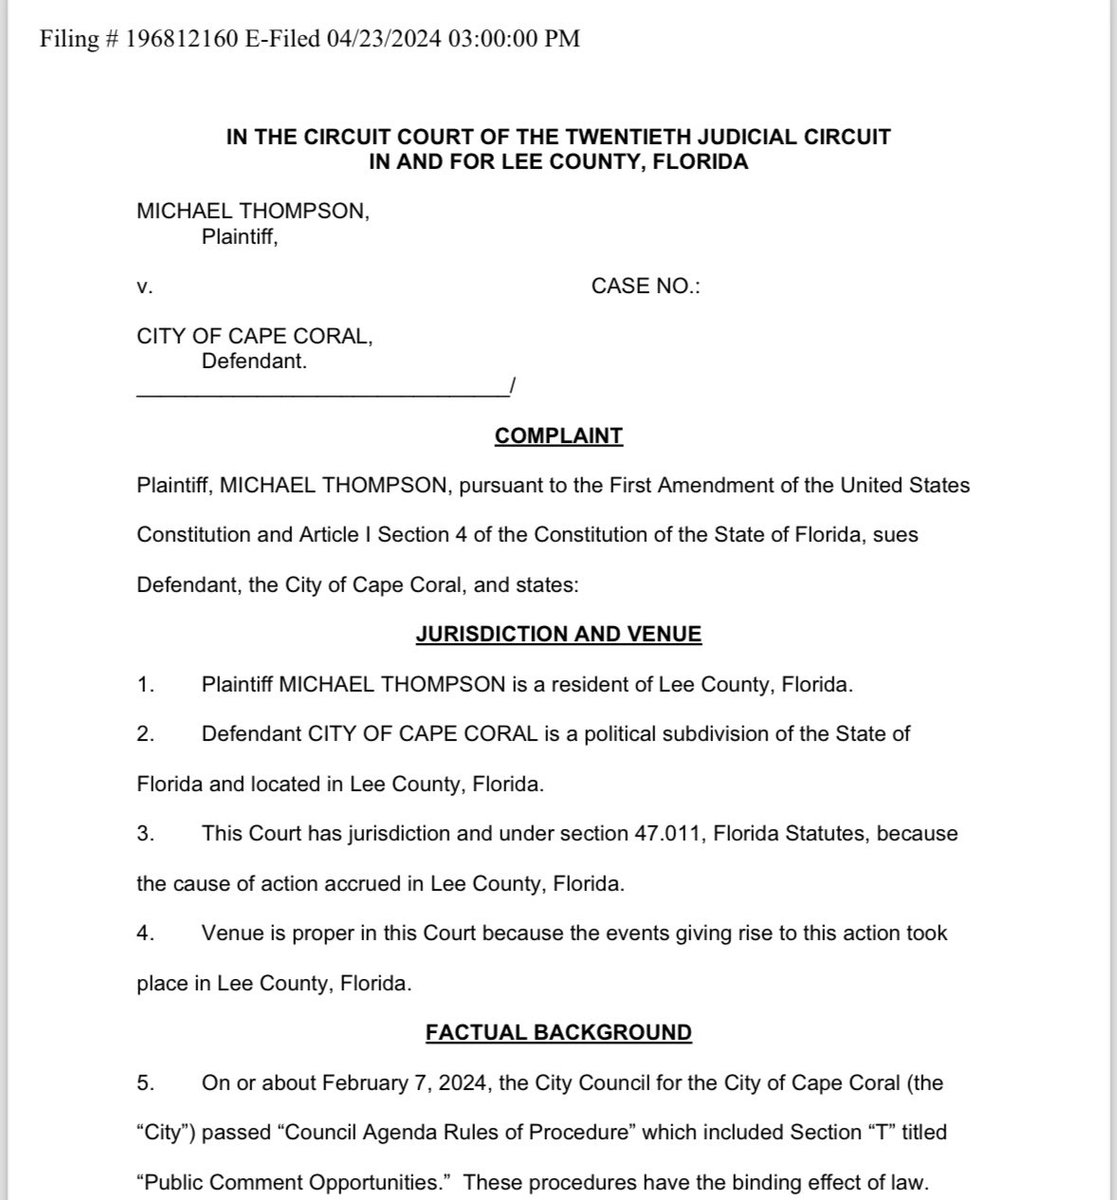 I just filed suit against the City of @CapeCoral on behalf of my client @Michael4FL for their recently enacted unconstitutional “rules of procedure,” which state that any attendee who is “boisterous” can & will be suspended from city council meetings—extremely overboard, vague,